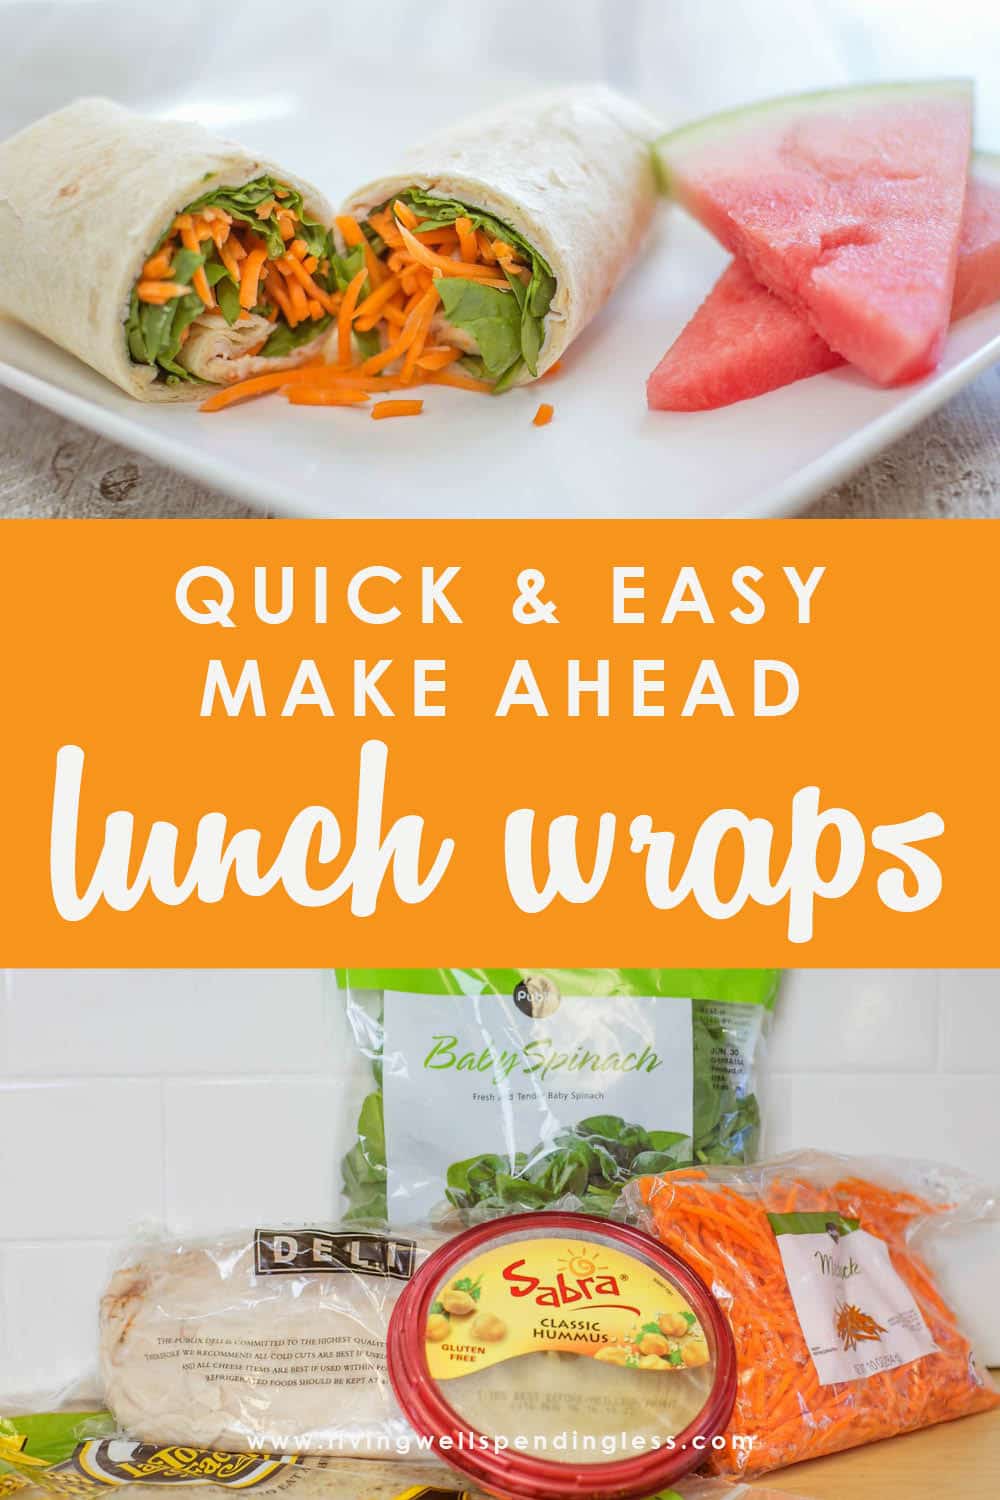 These delicious make ahead lunch wraps not only come together fast, they stay fresh in the fridge for up to 5 days. The flavors stay fresh all week long!